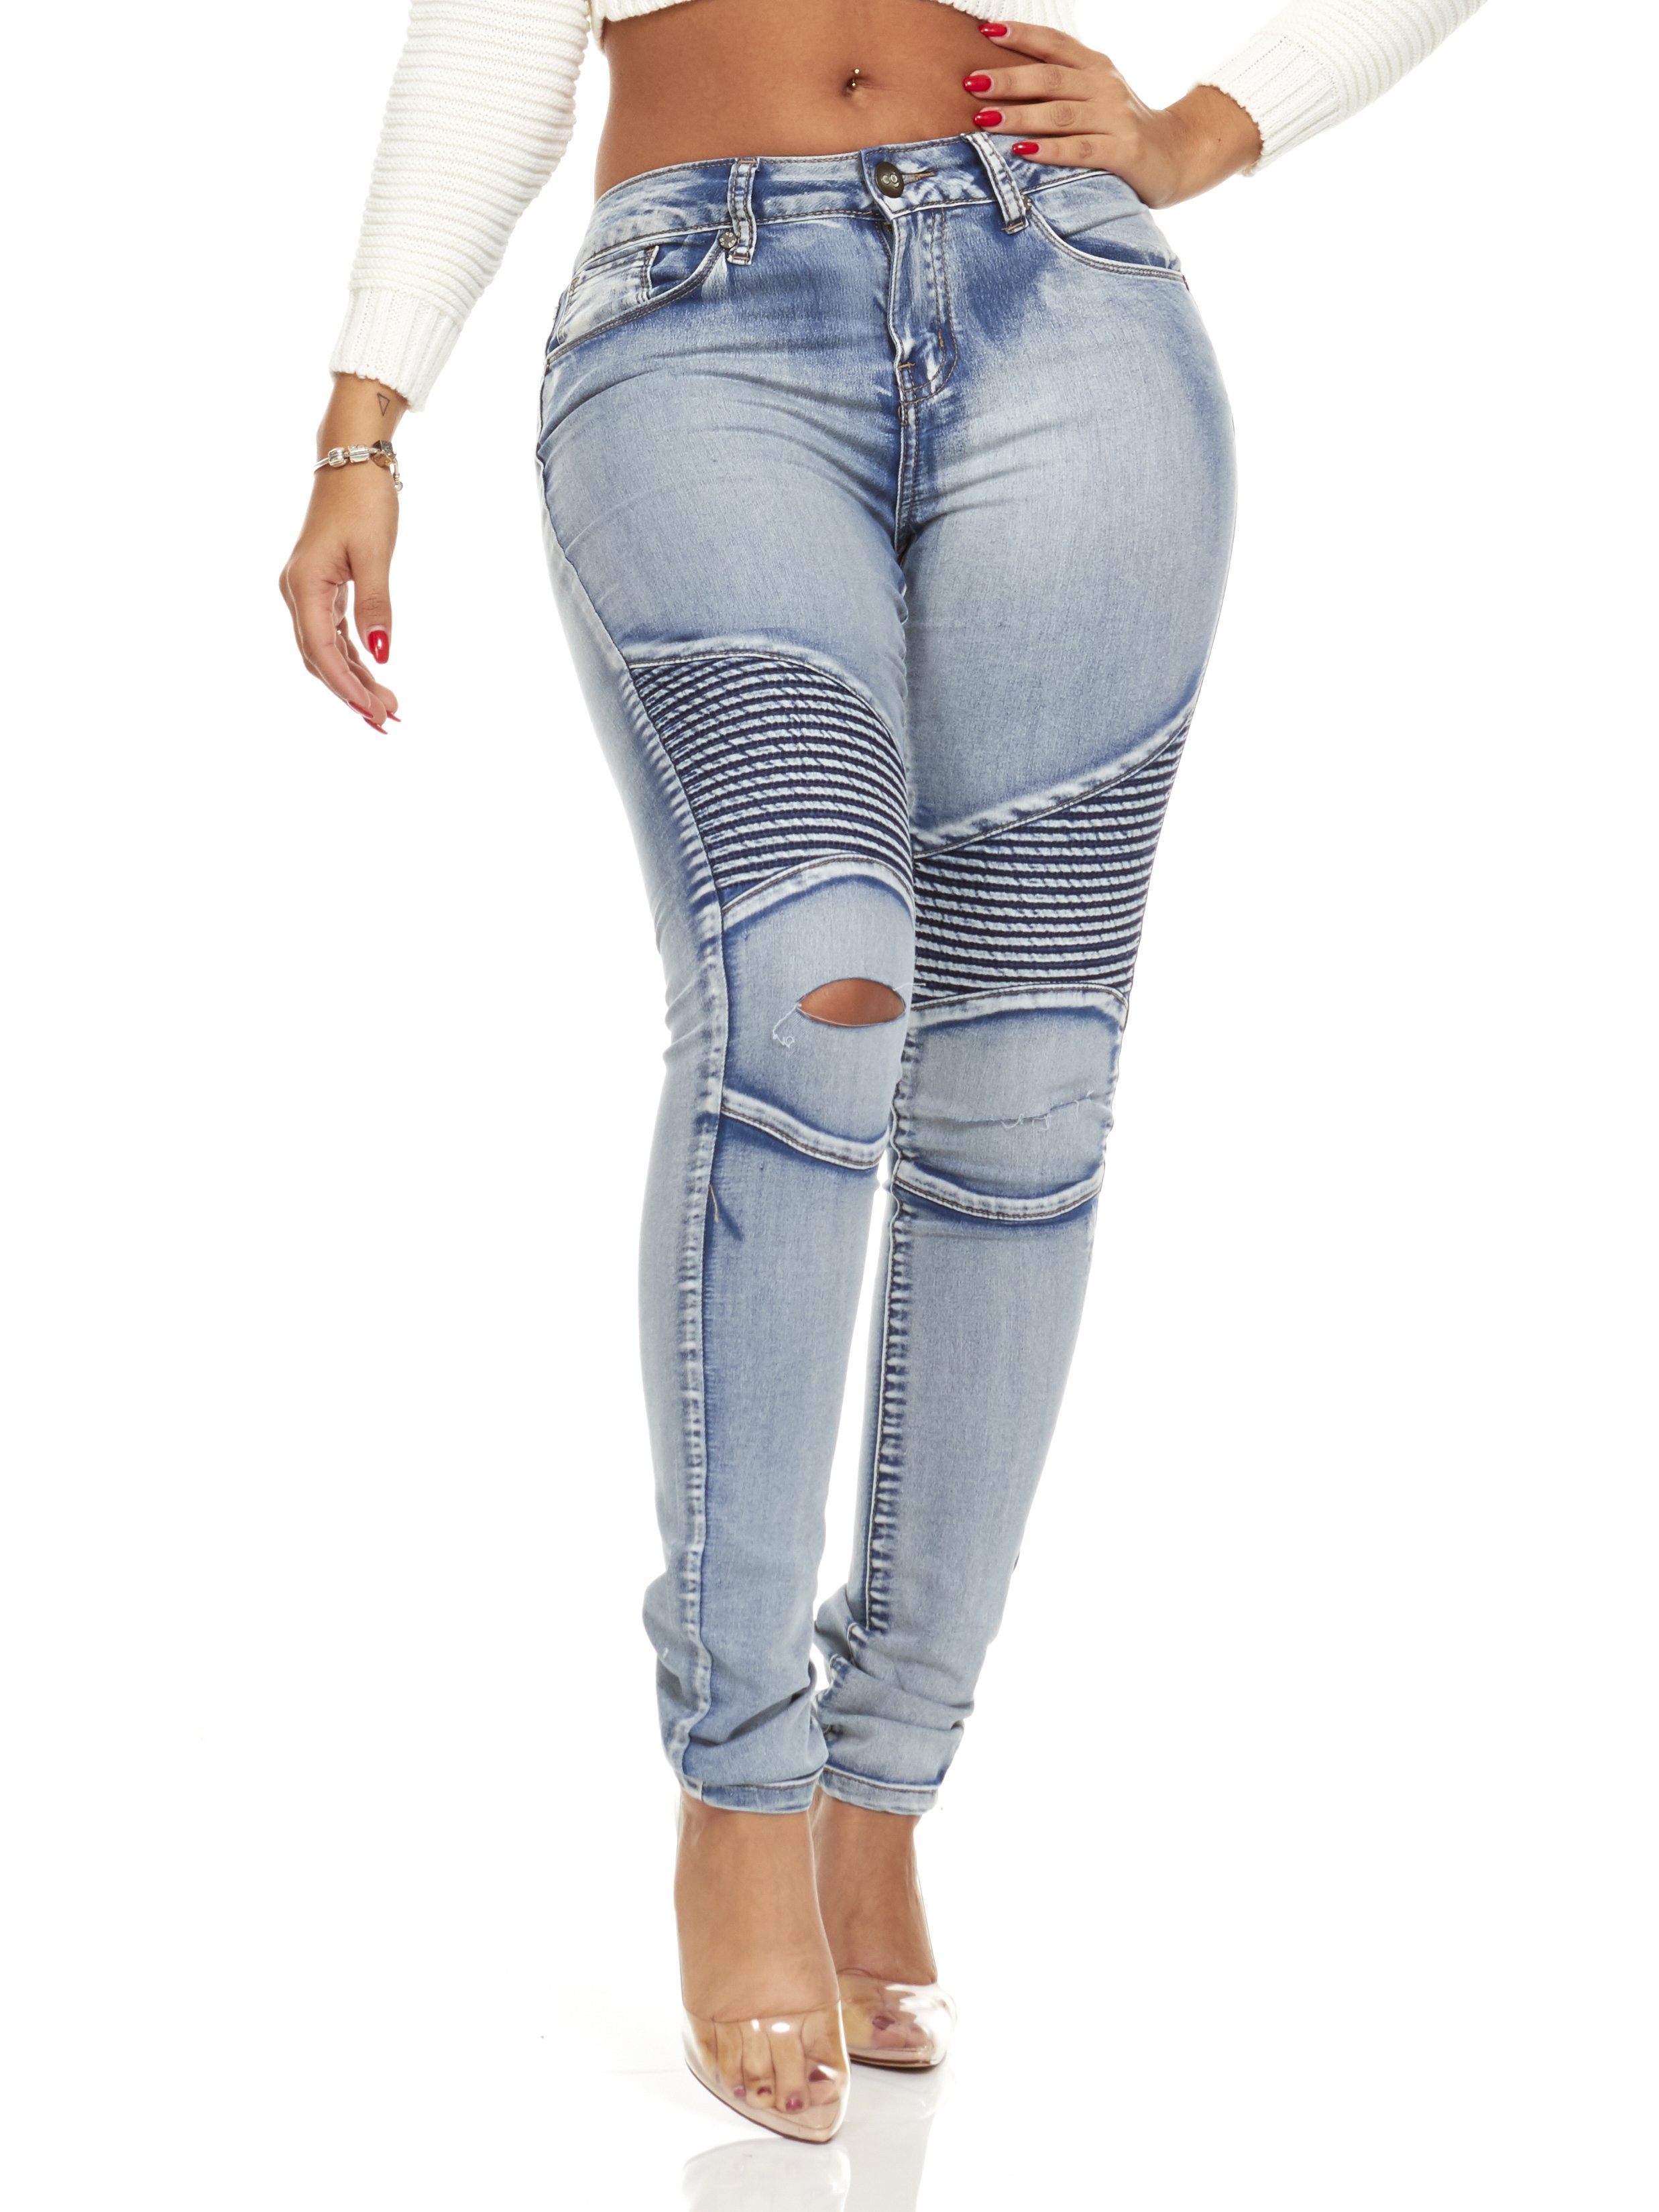 Note: Find out more on Ladies Skinny Jeans